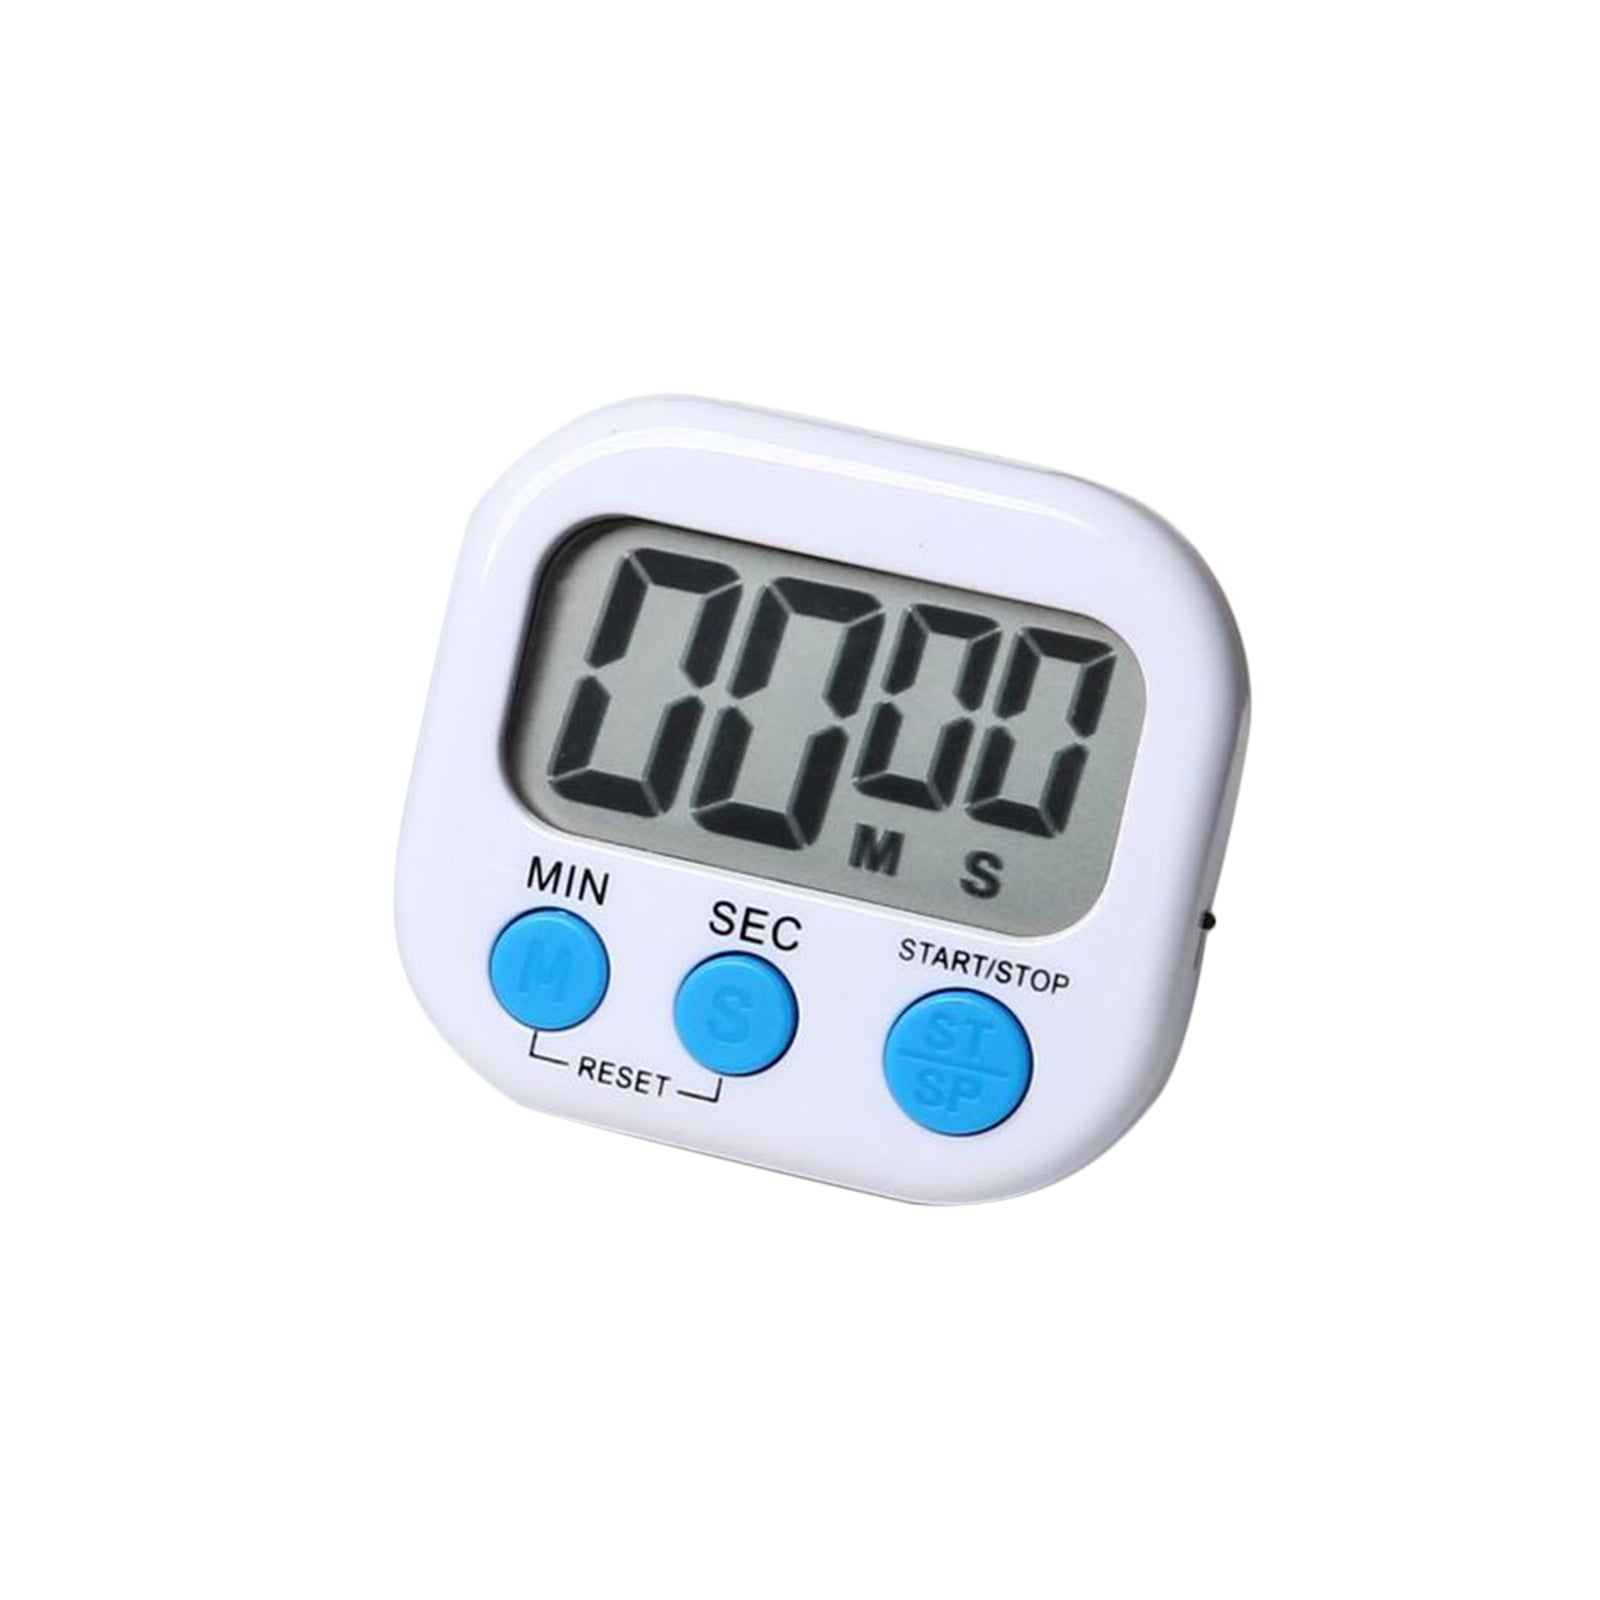 Modern Design Alarm Clock Digital Rechargeable Square Electronic LED Alarm  Retro Knob Switch Bedside Clock With Day Night Sensor Price LJ201204 From  Cong08, $41.98 | DHgate.Com